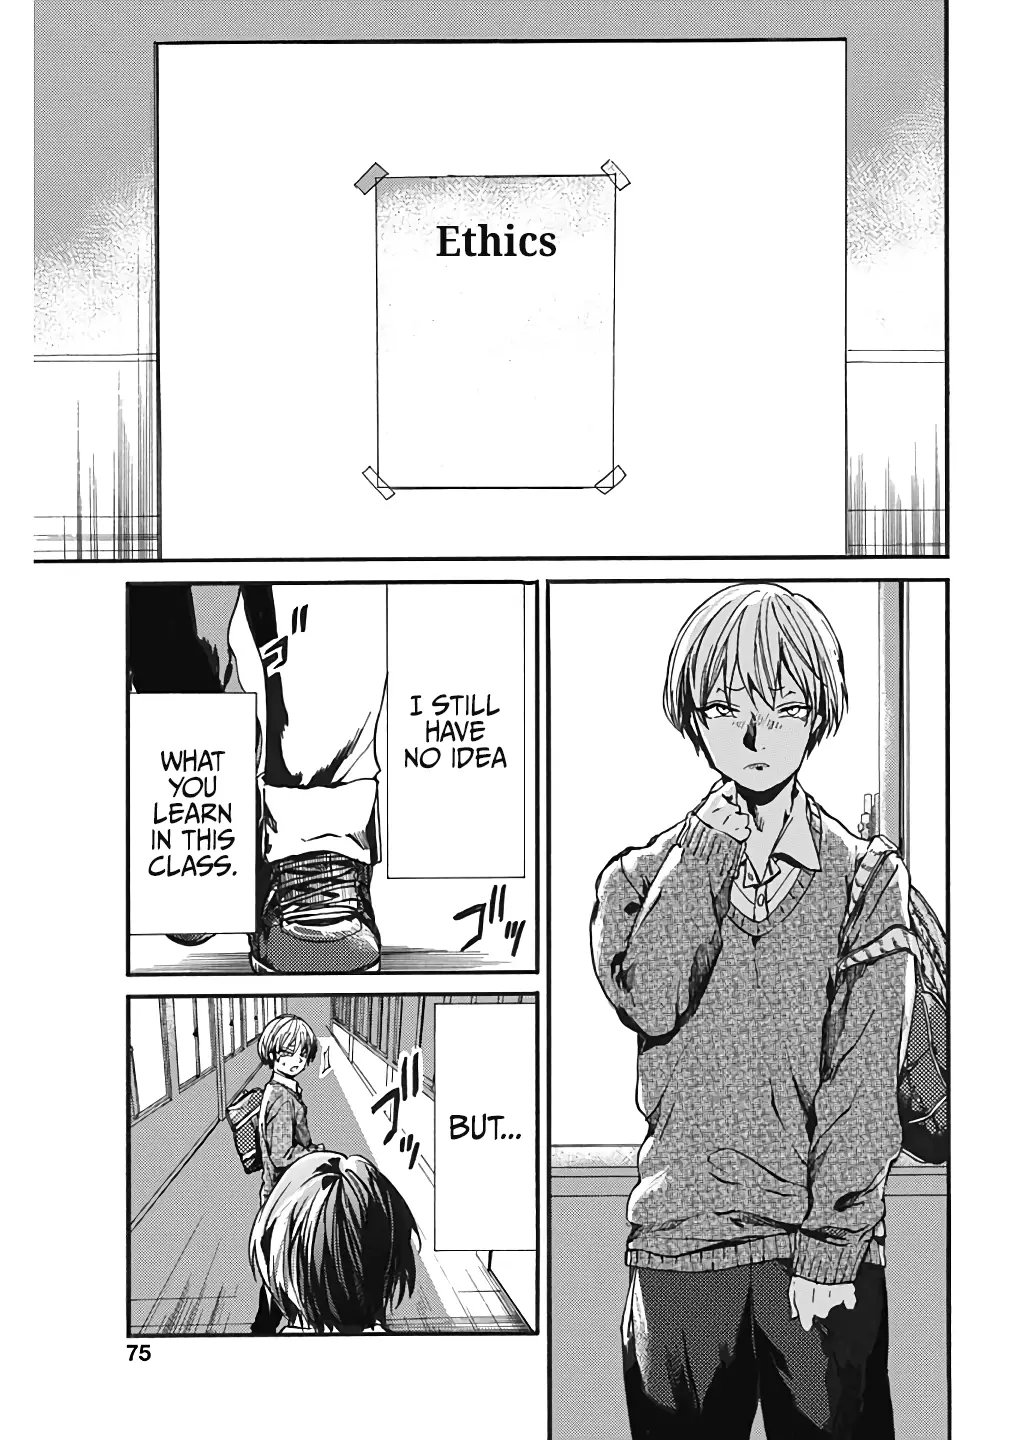 From Now On We Begin Ethics. - 20 page 30